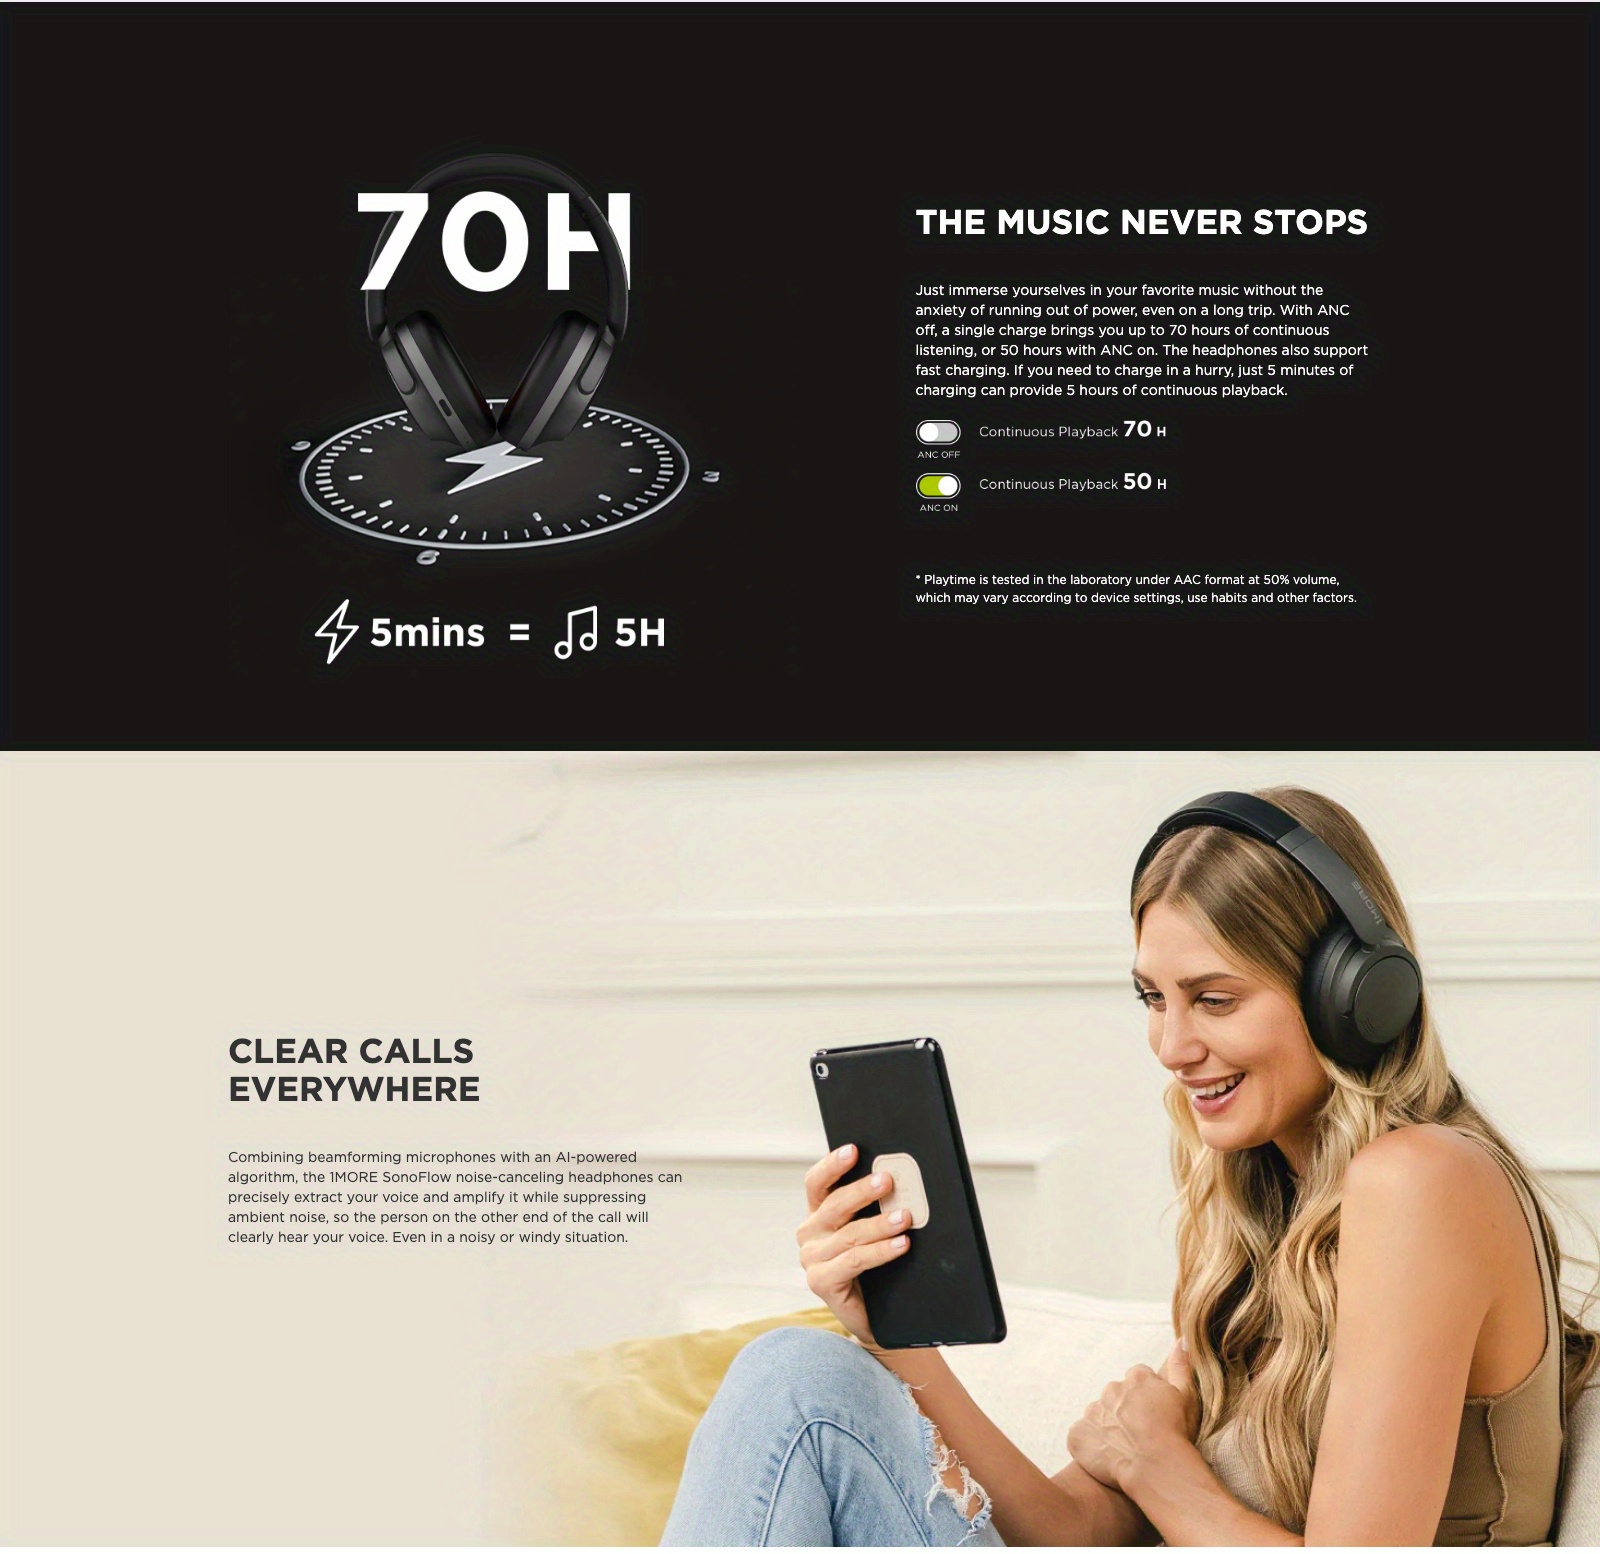 1MORE Sonoflow HC905 Wireless Bluetooth Active Noise Canceling Headphones,  Hi-Res LDAC 70H Battery, Connect 2 Devices, 5 Mic